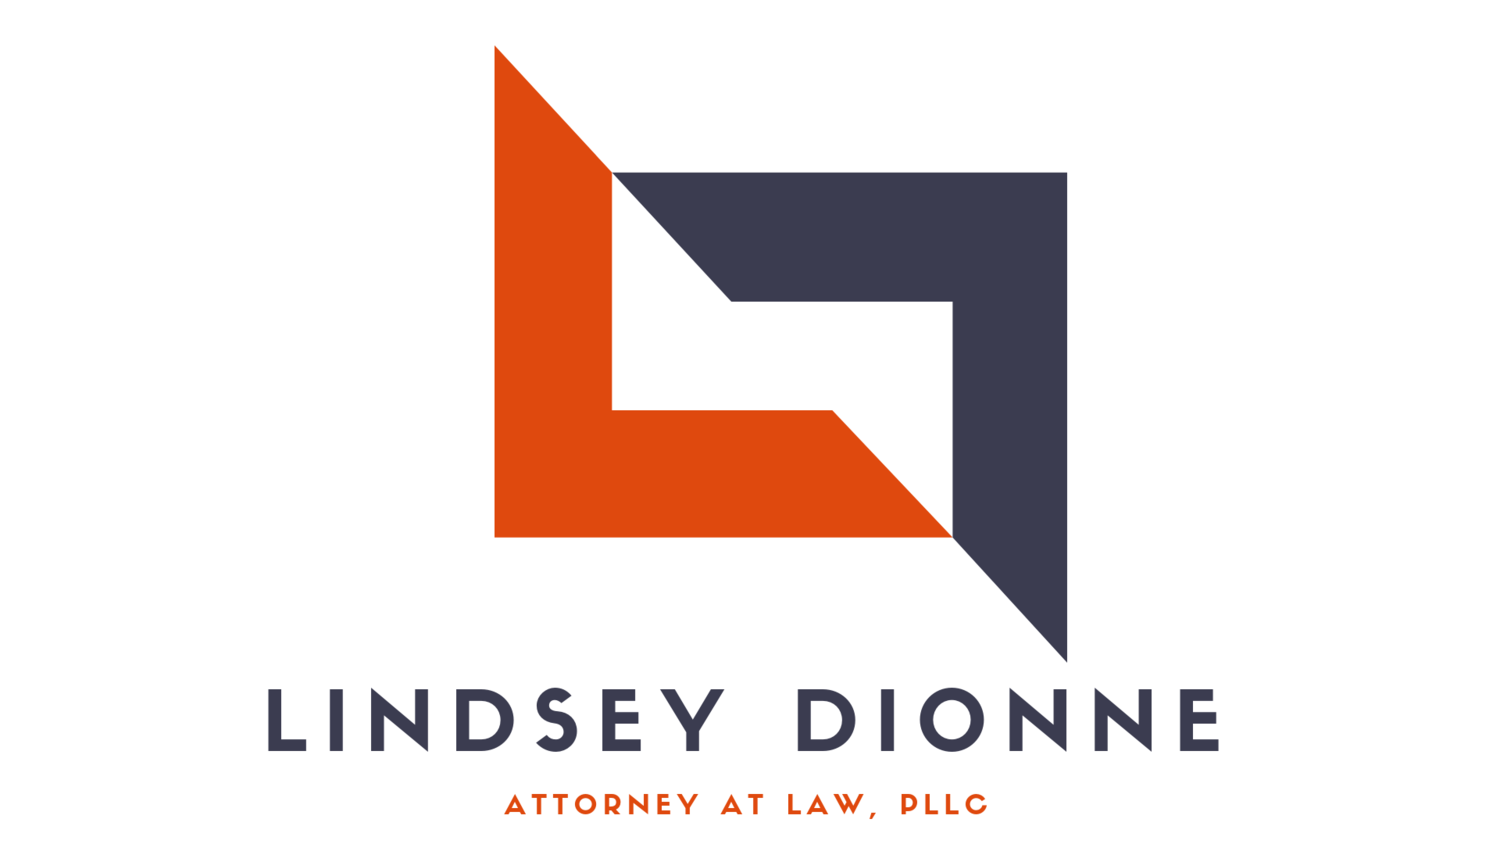 LINDSEY DIONNE ATTORNEY AT LAW, PLLC